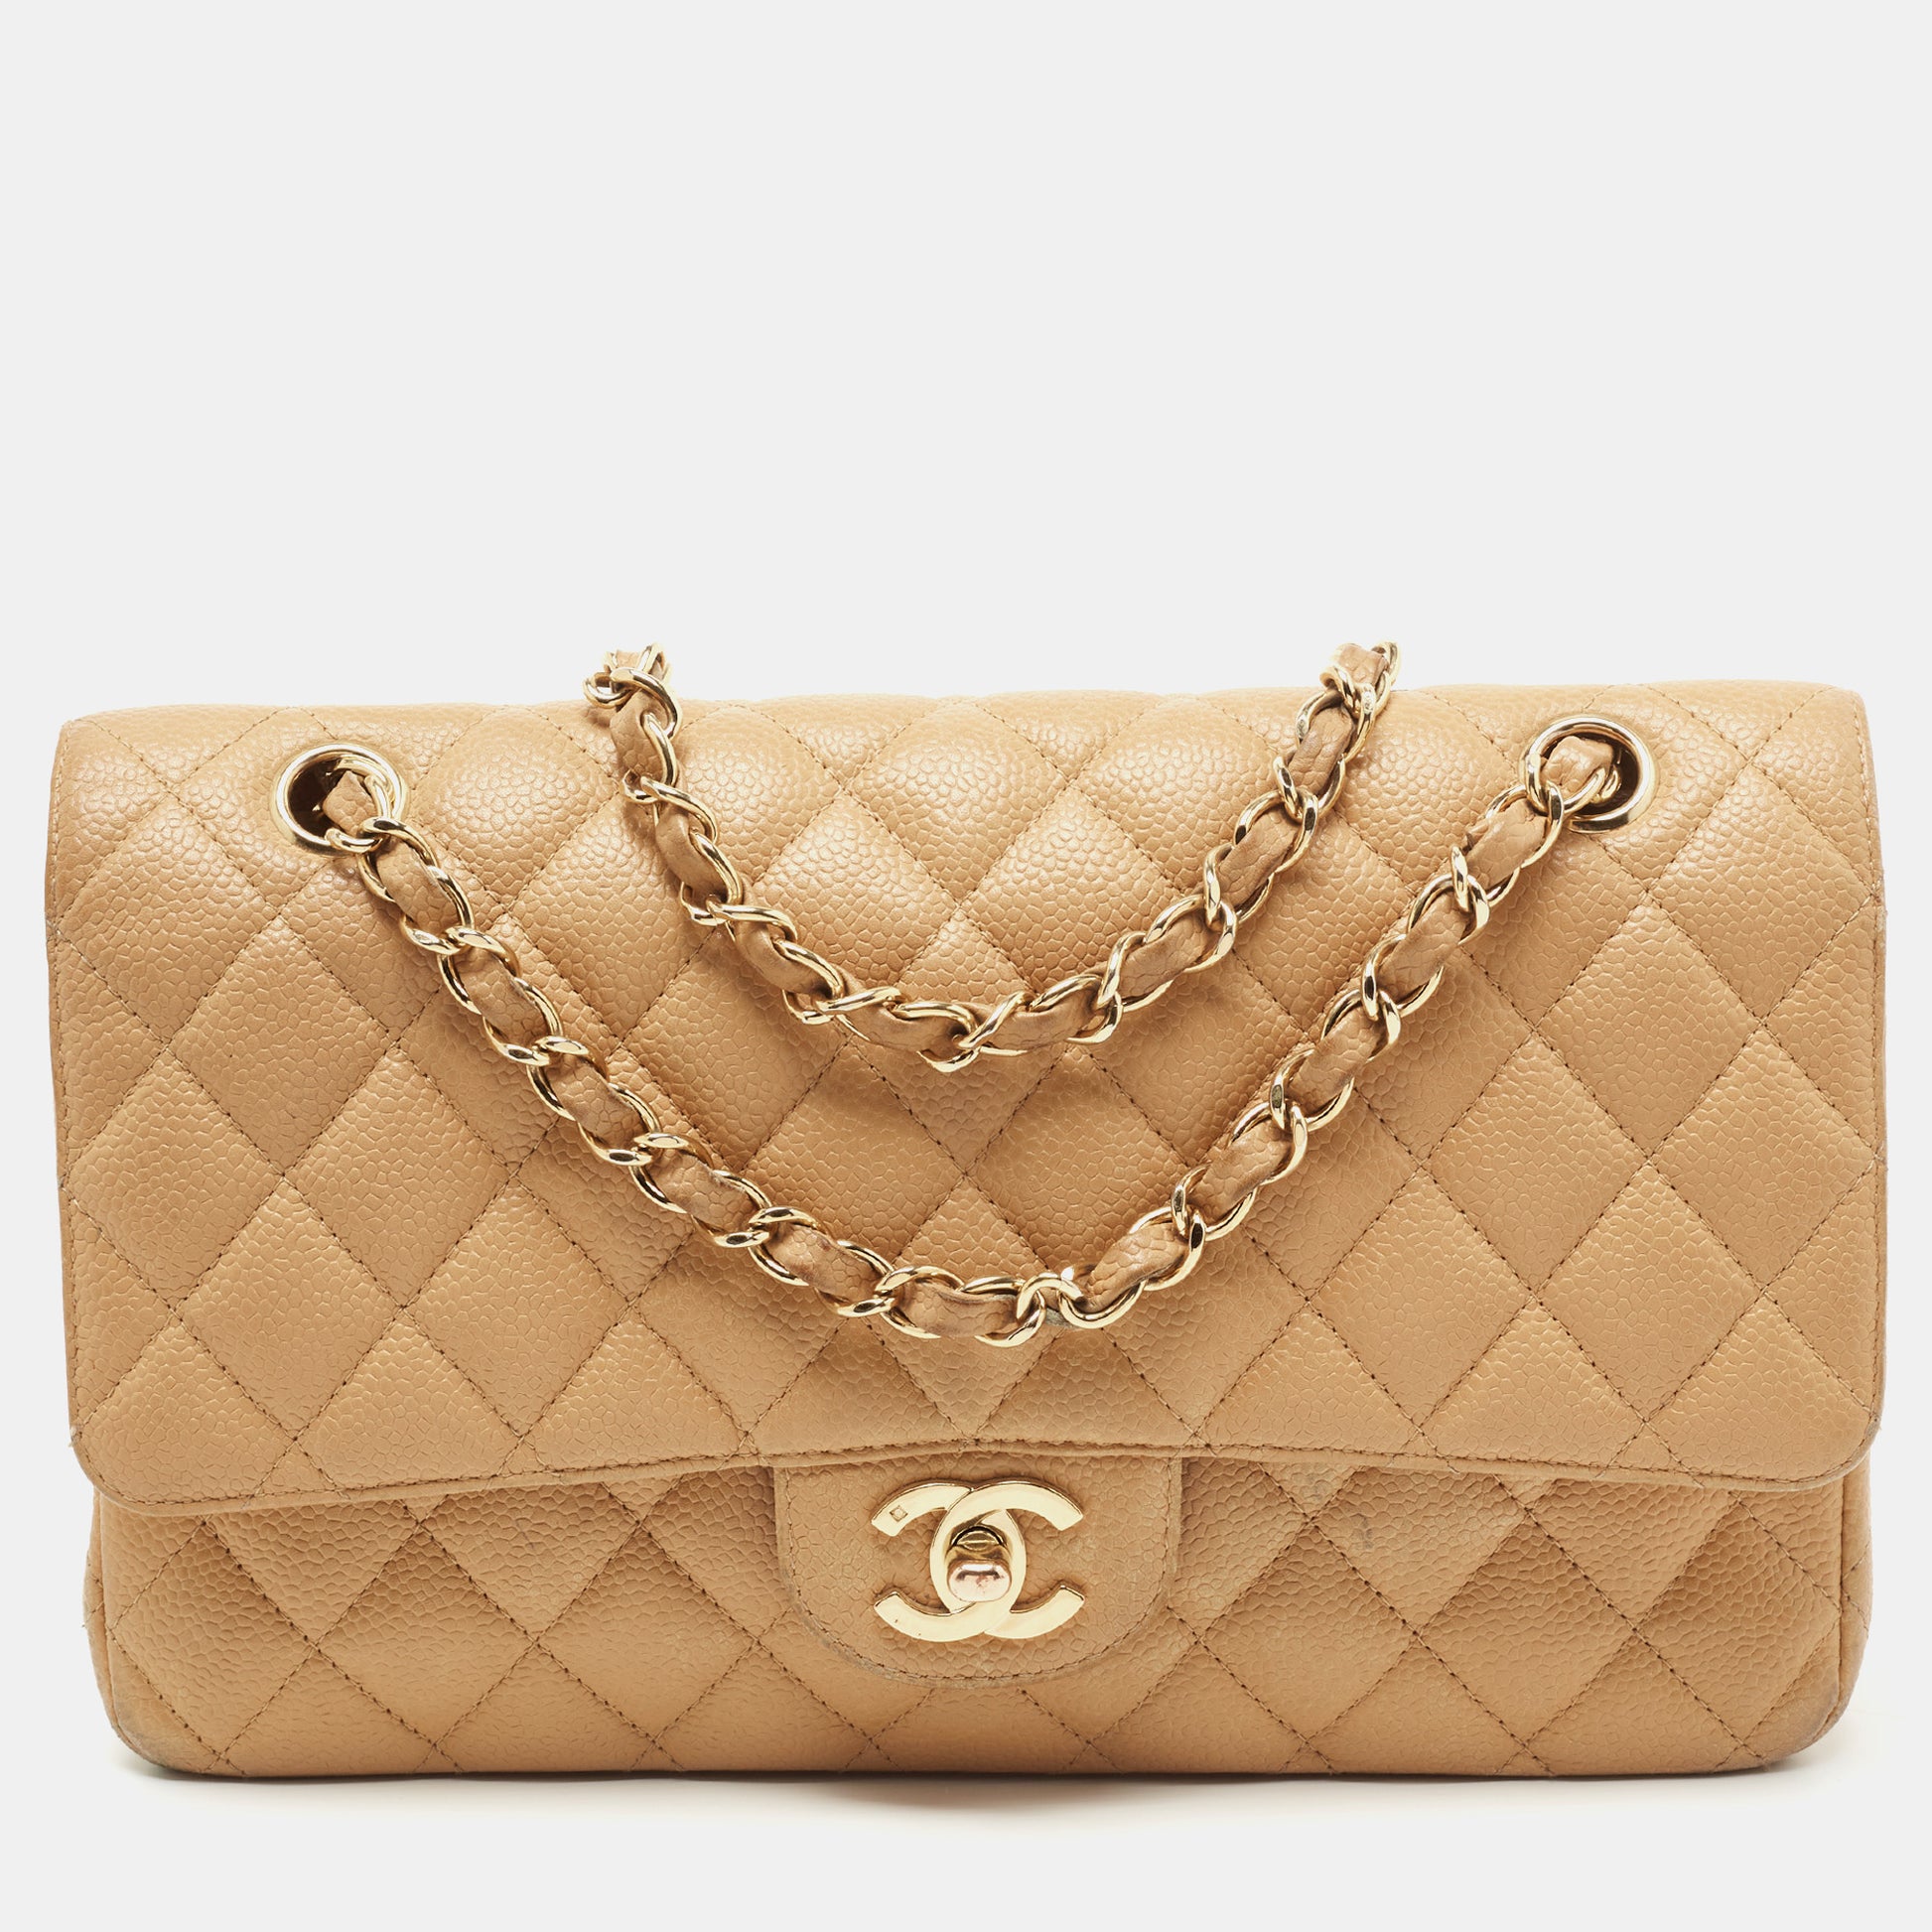 Chanel Classic Quilted Caviar Double Flap Jumbo Bag in Beige